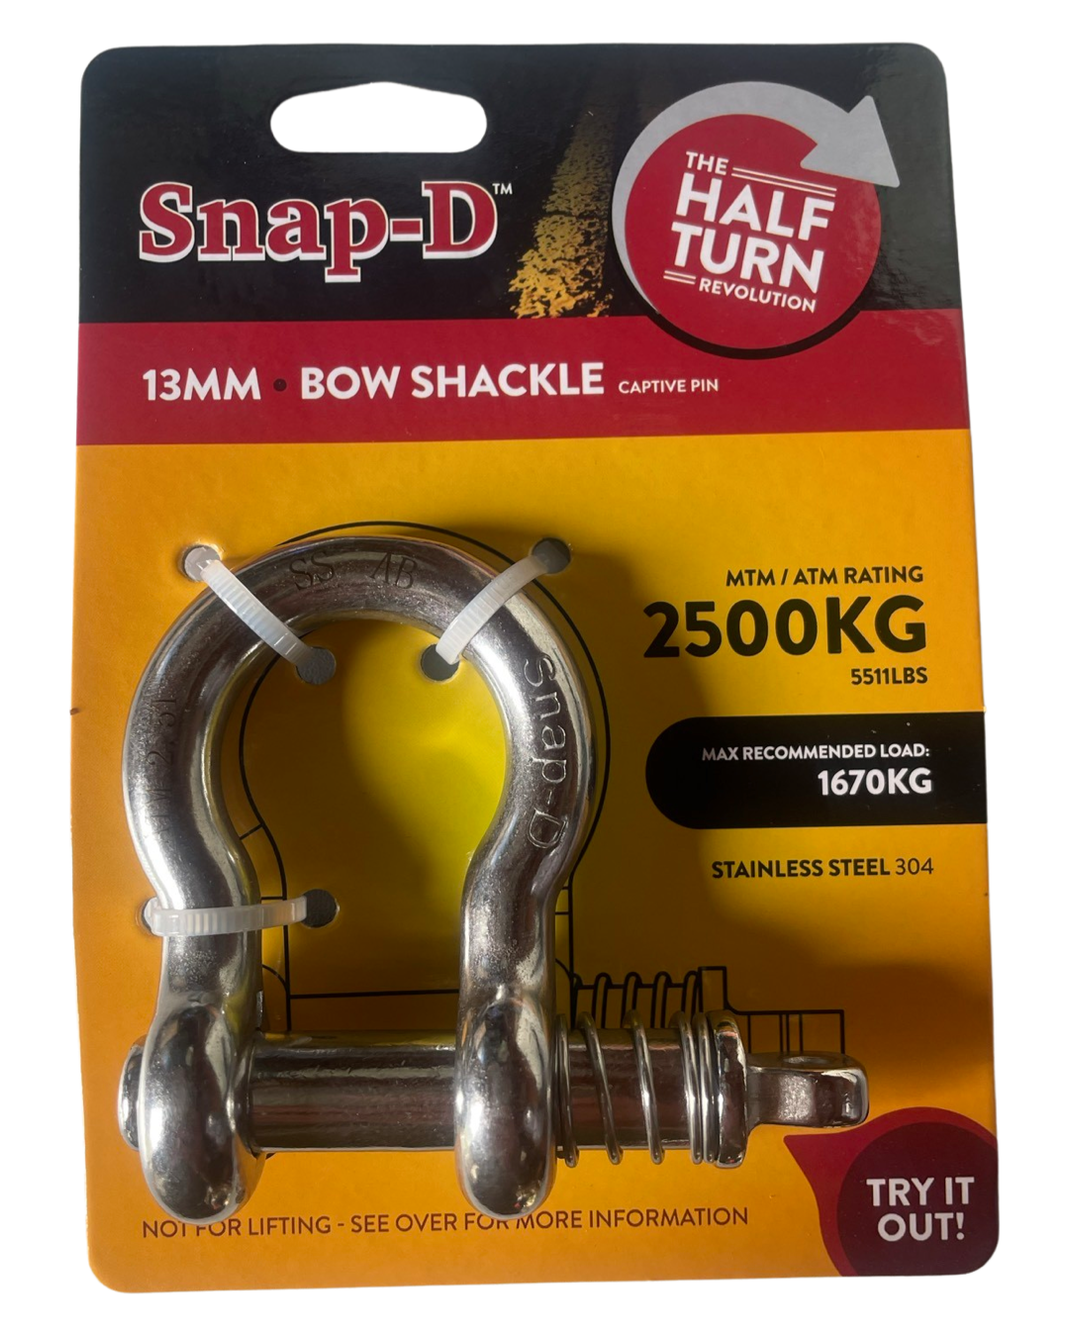 Bow Shackle (13MM - 2500KG)